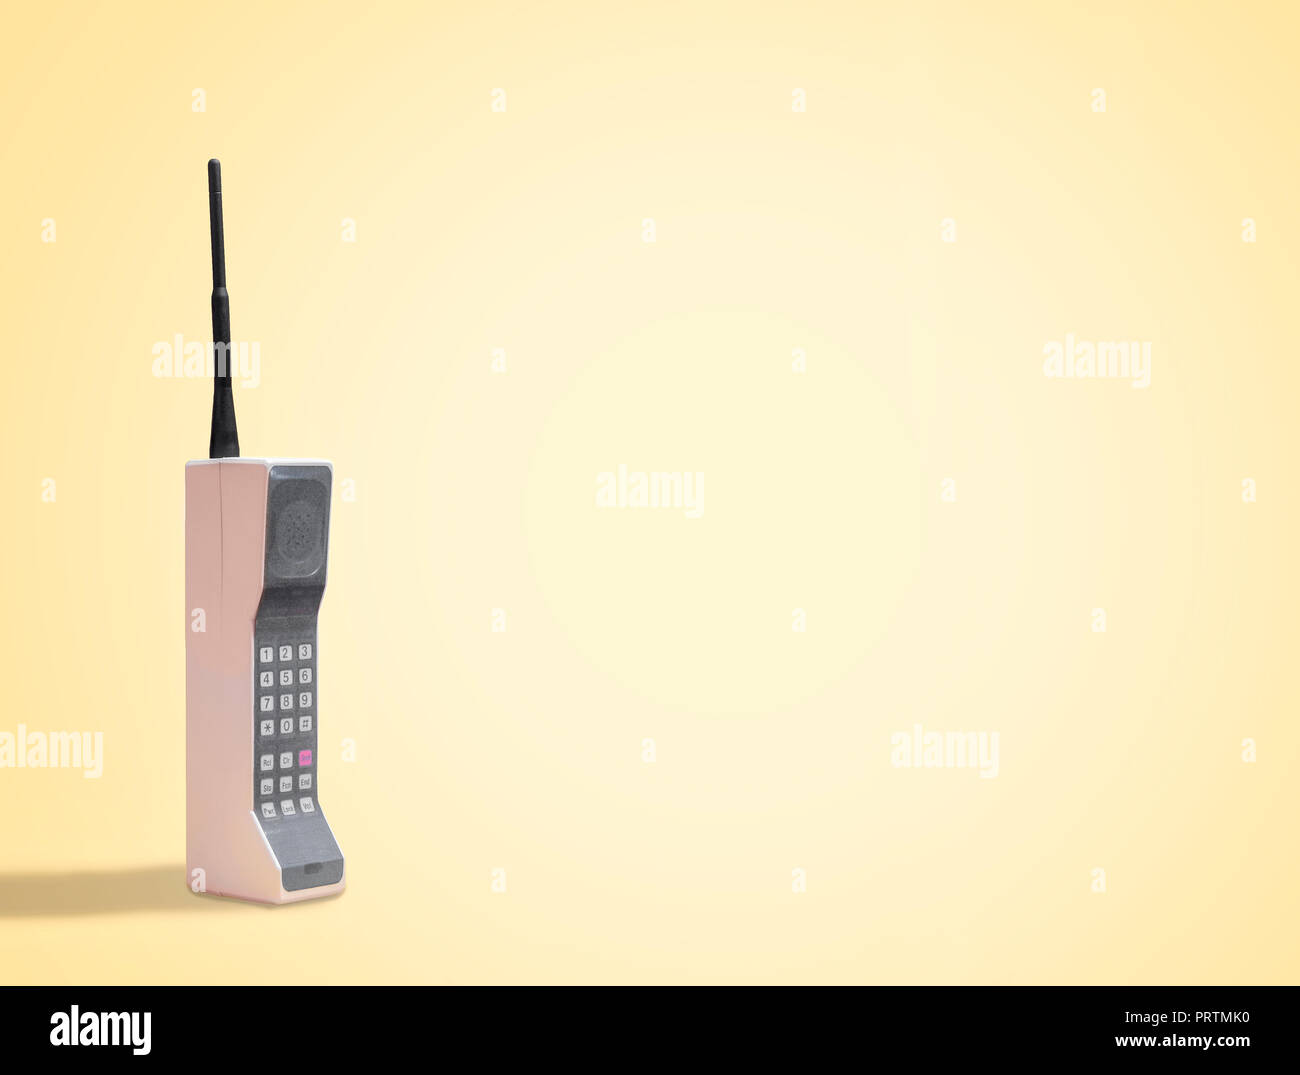 Retro mobile cell phone on a vintage yellow background with space for copy and text Stock Photo